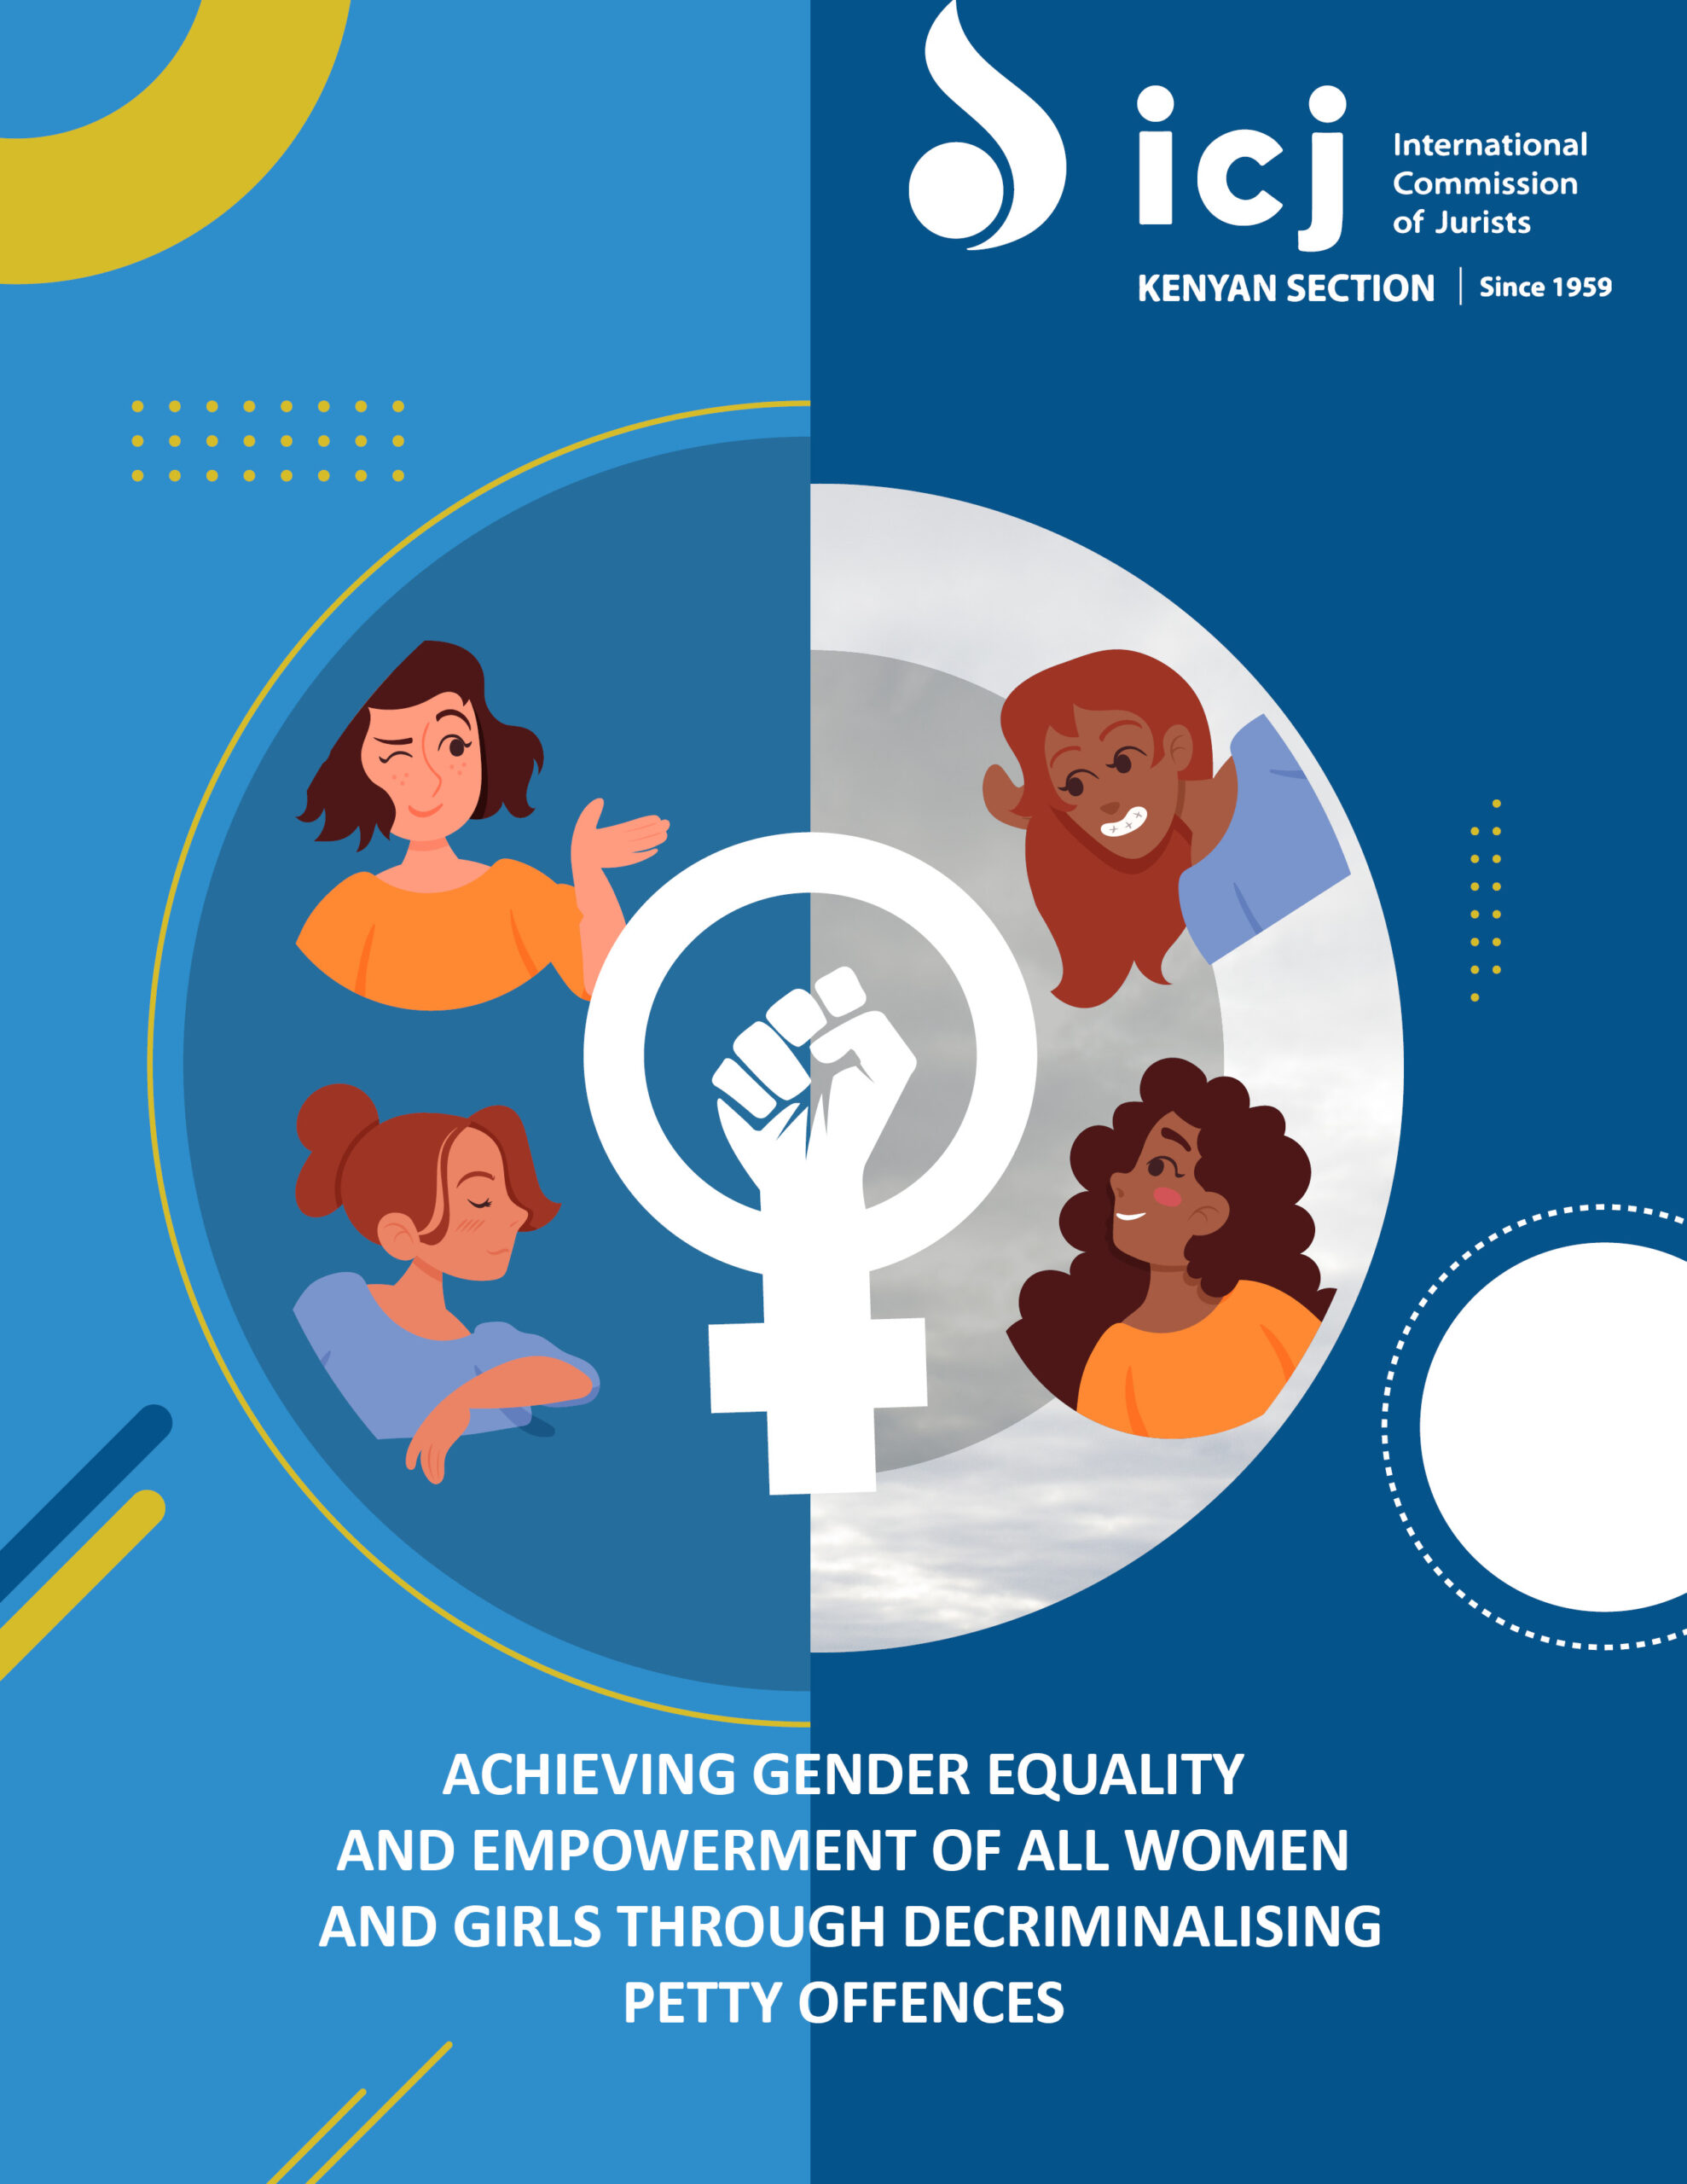 Achieving Gender Equality and Empowerment of Women And Girls Through Decriminalising Petty Offences